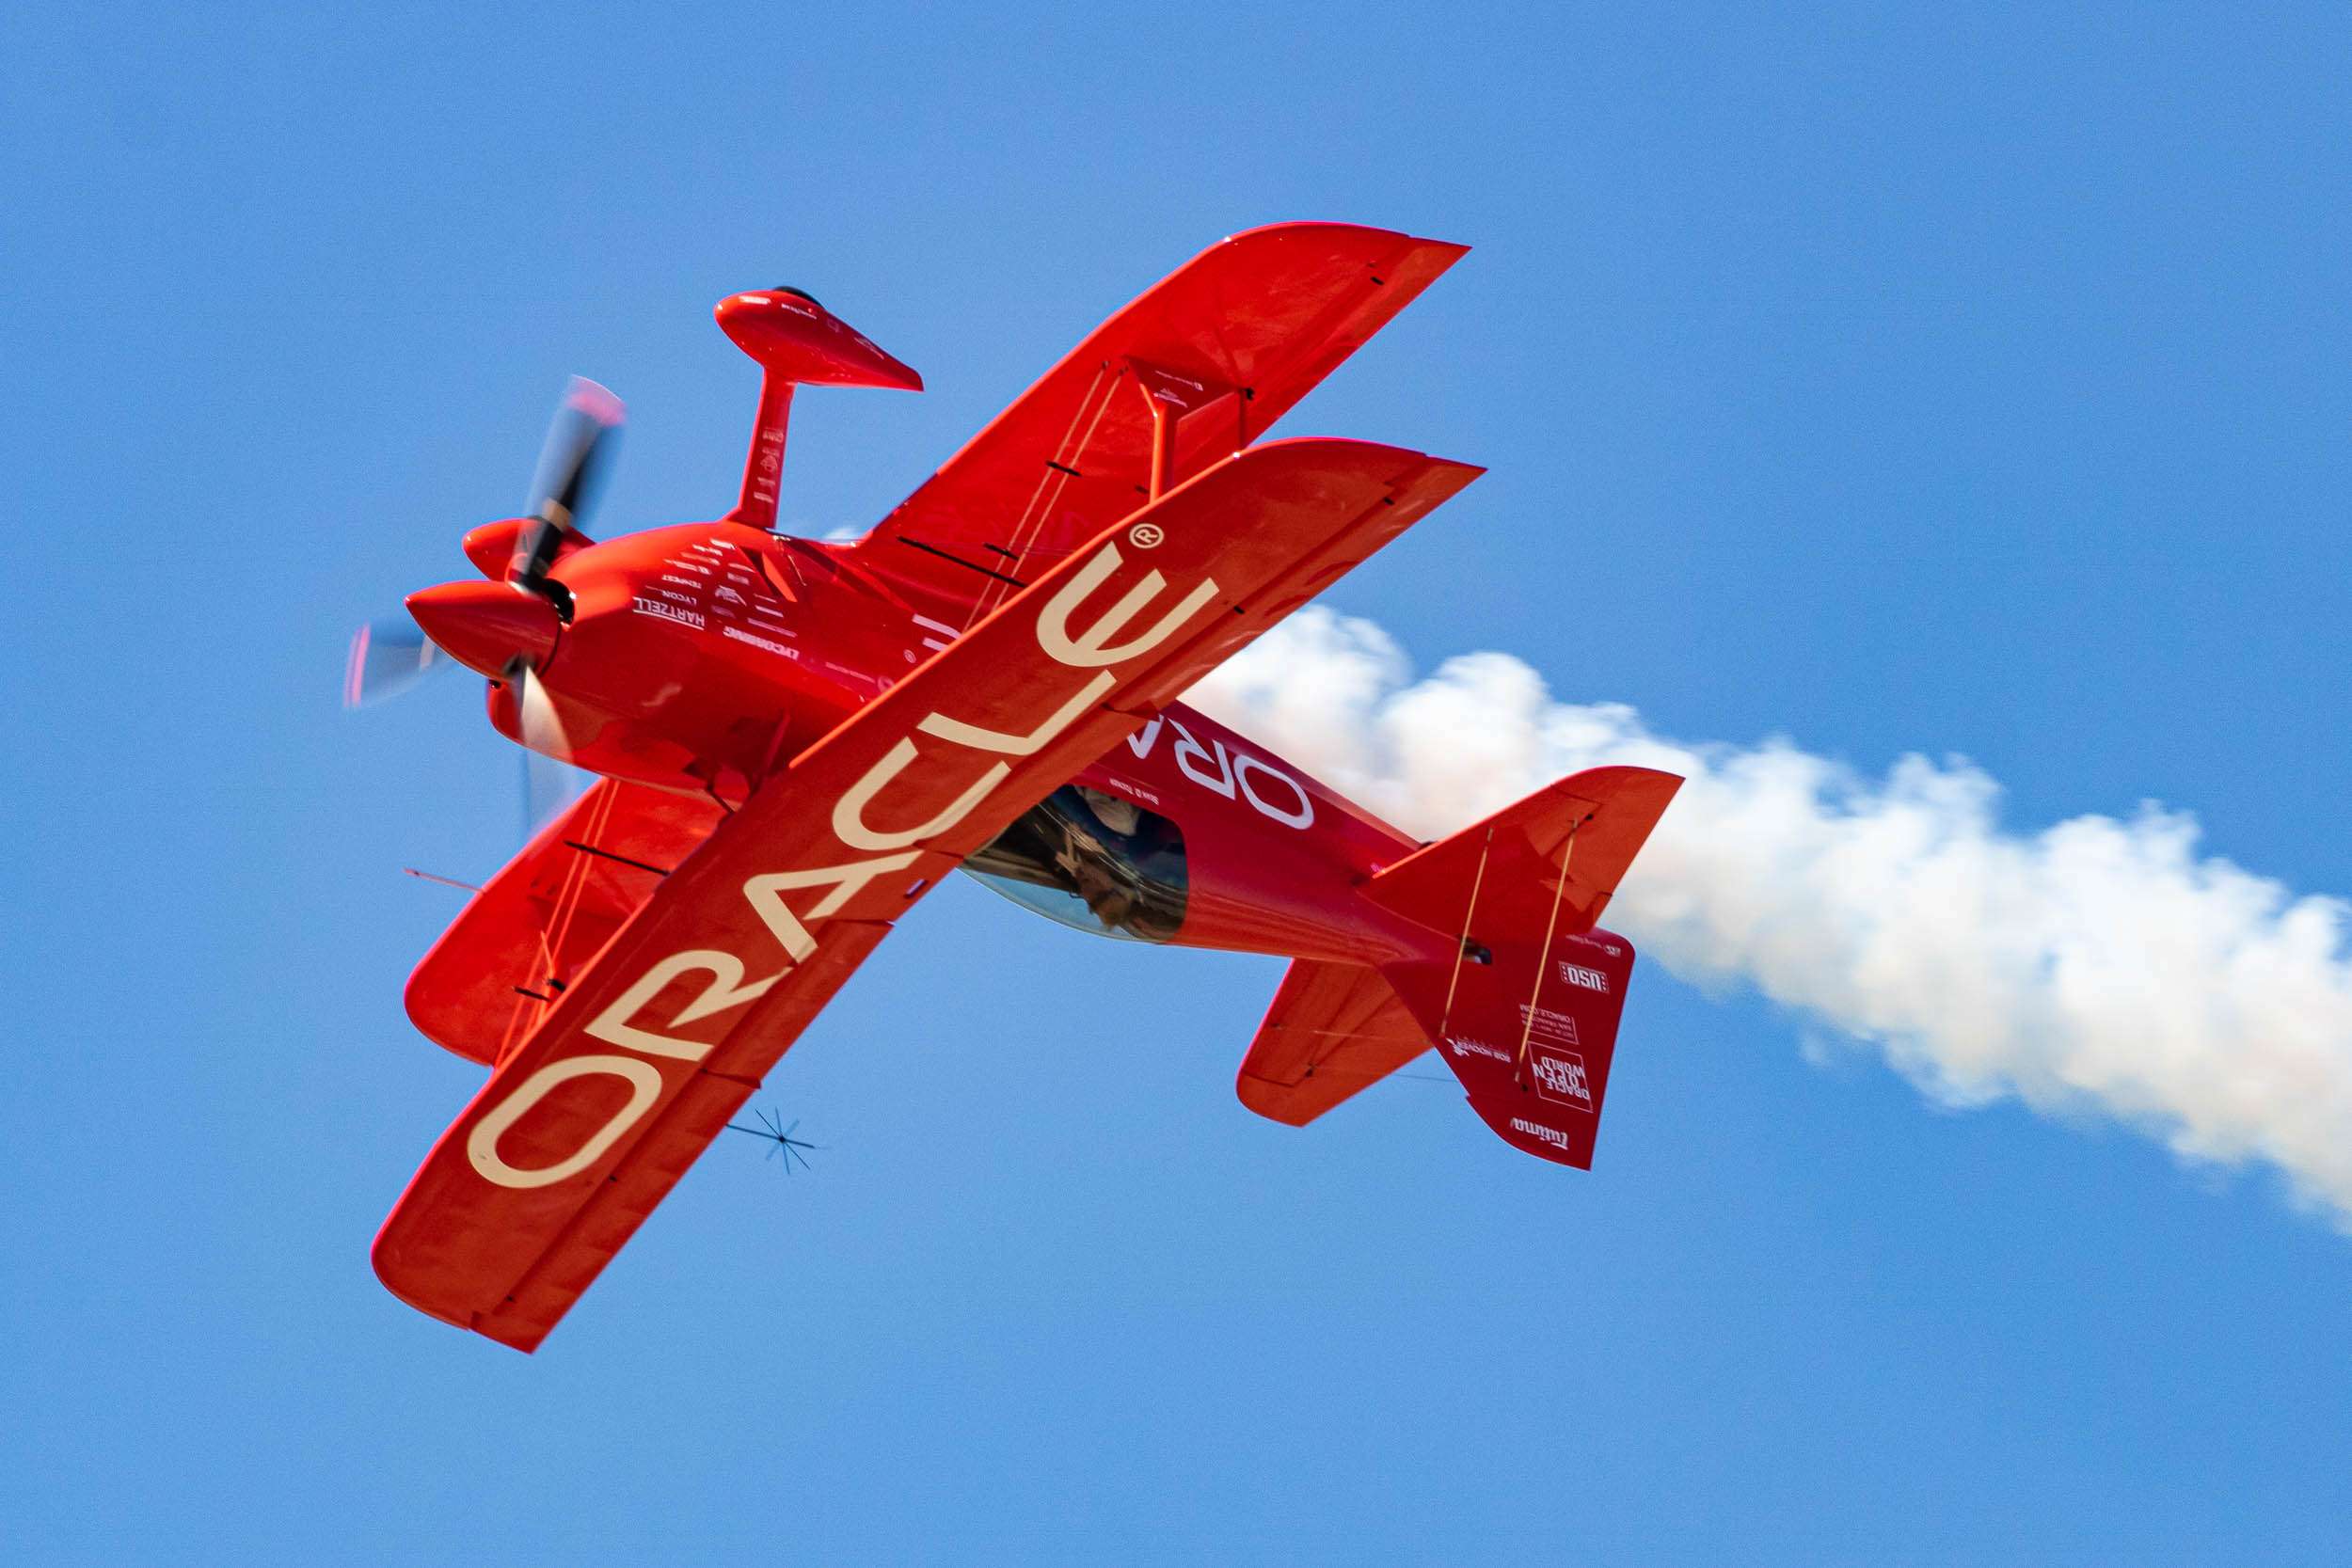 Sean D. Tucker flying inverted in the red Oracle Challenger III biplane